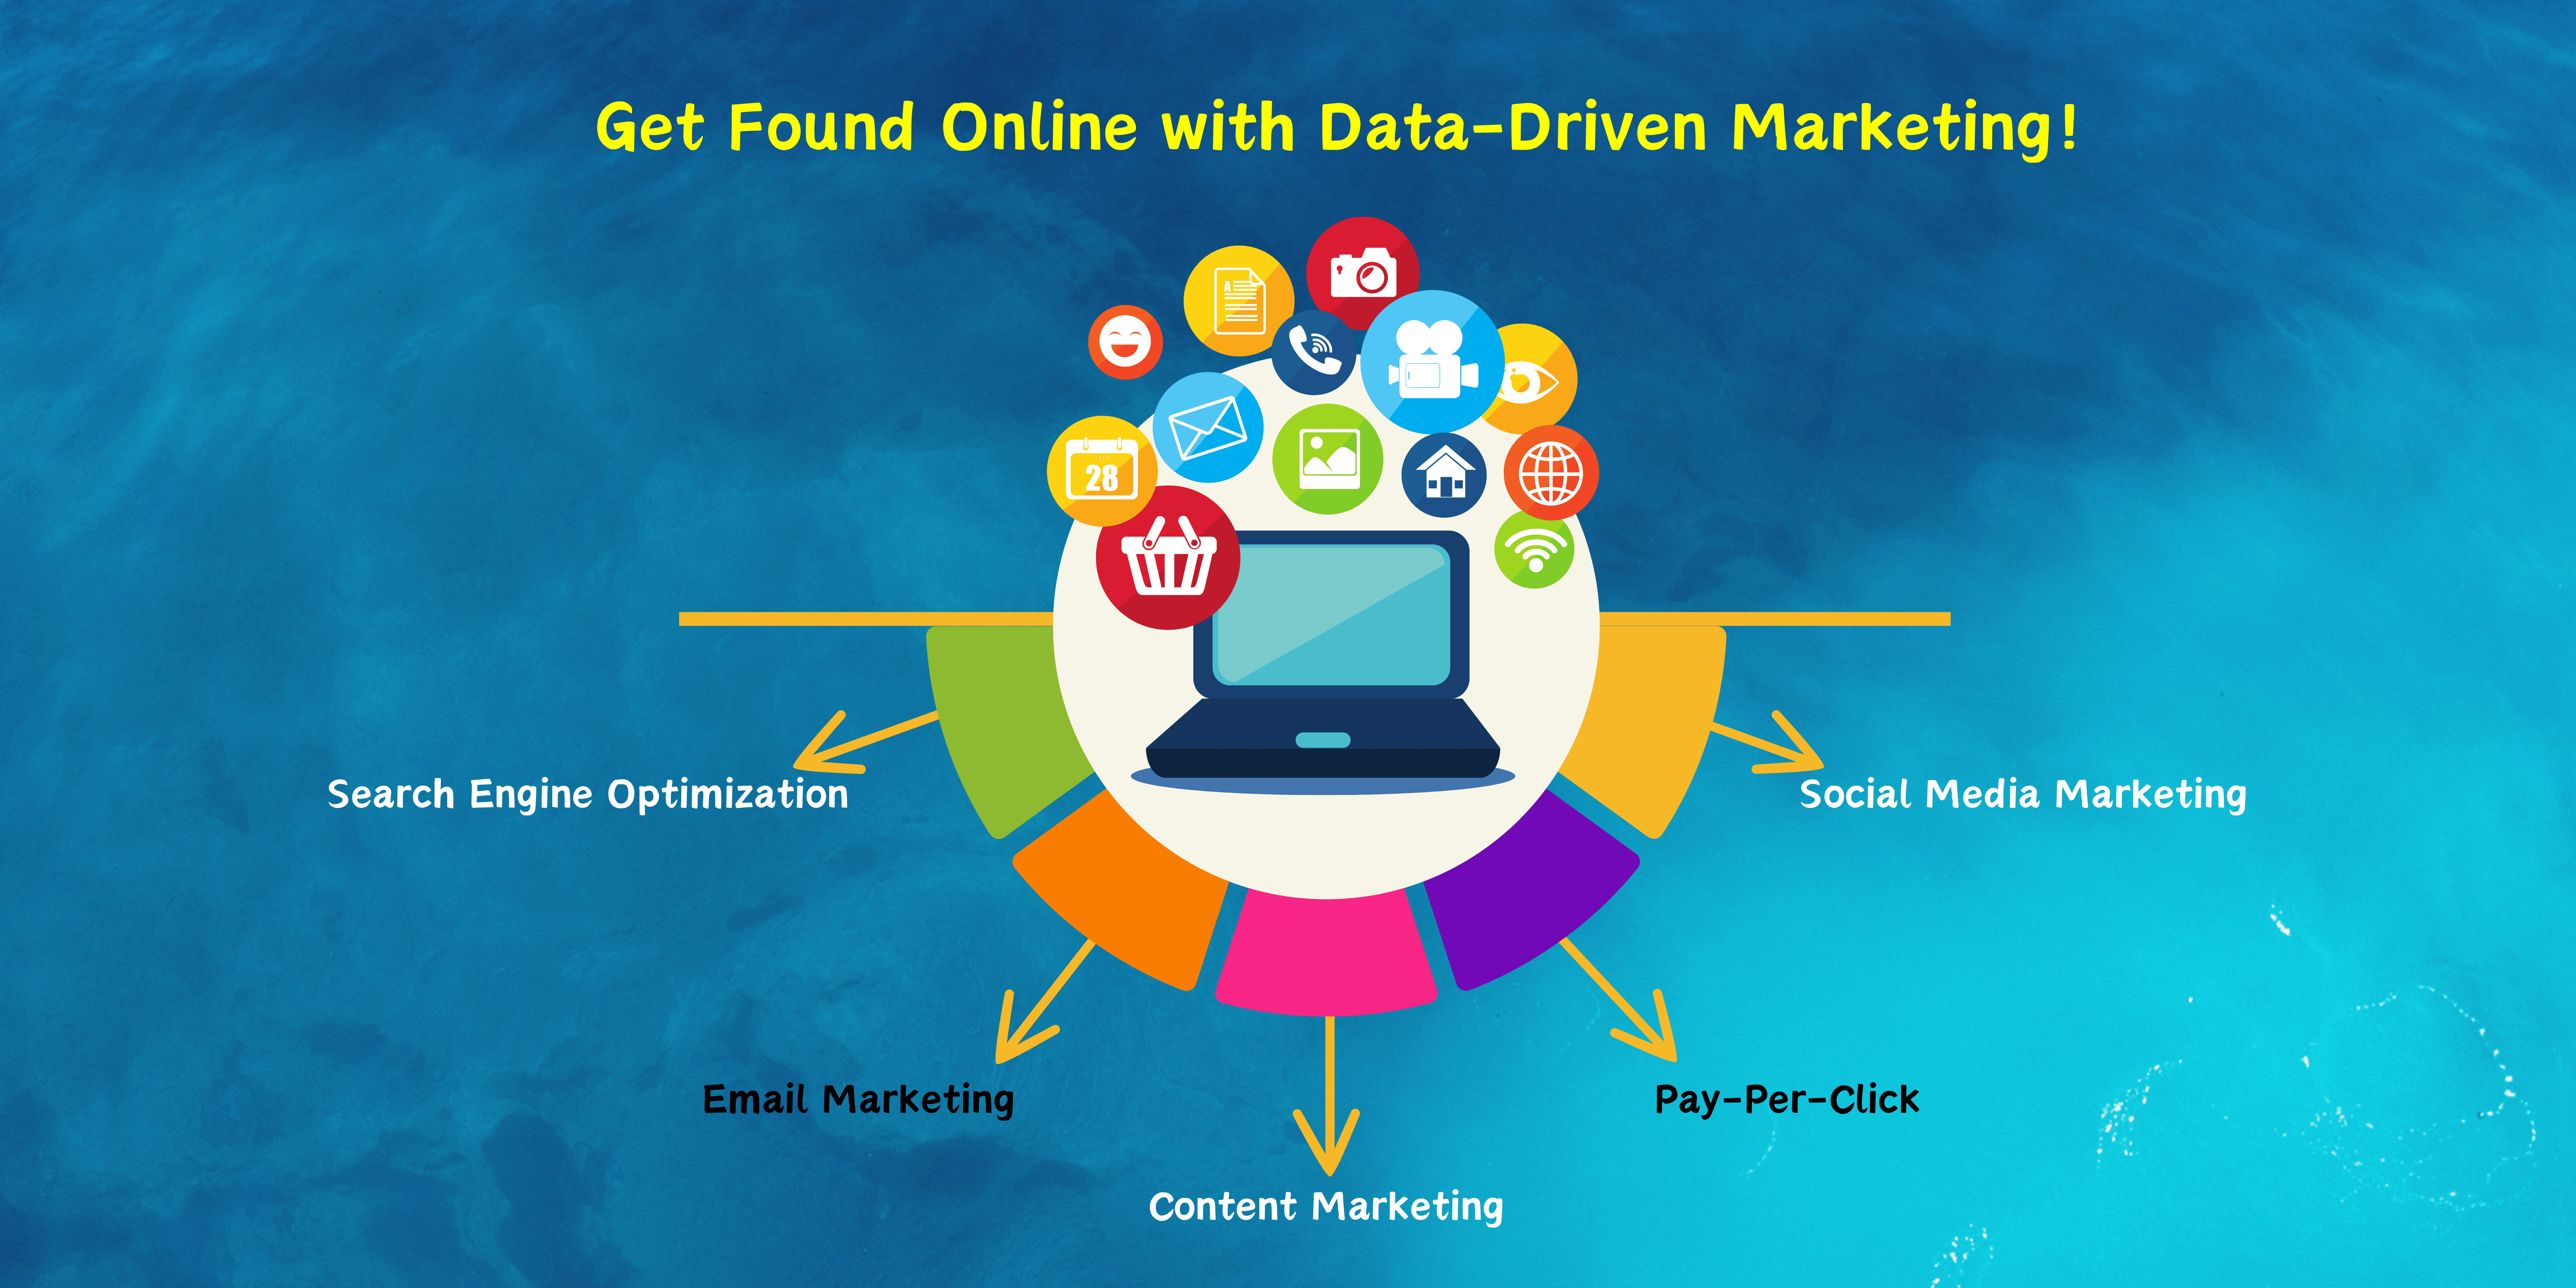 Digital marketing services to grow your online presence, reach more customers, and achieve your business goals.